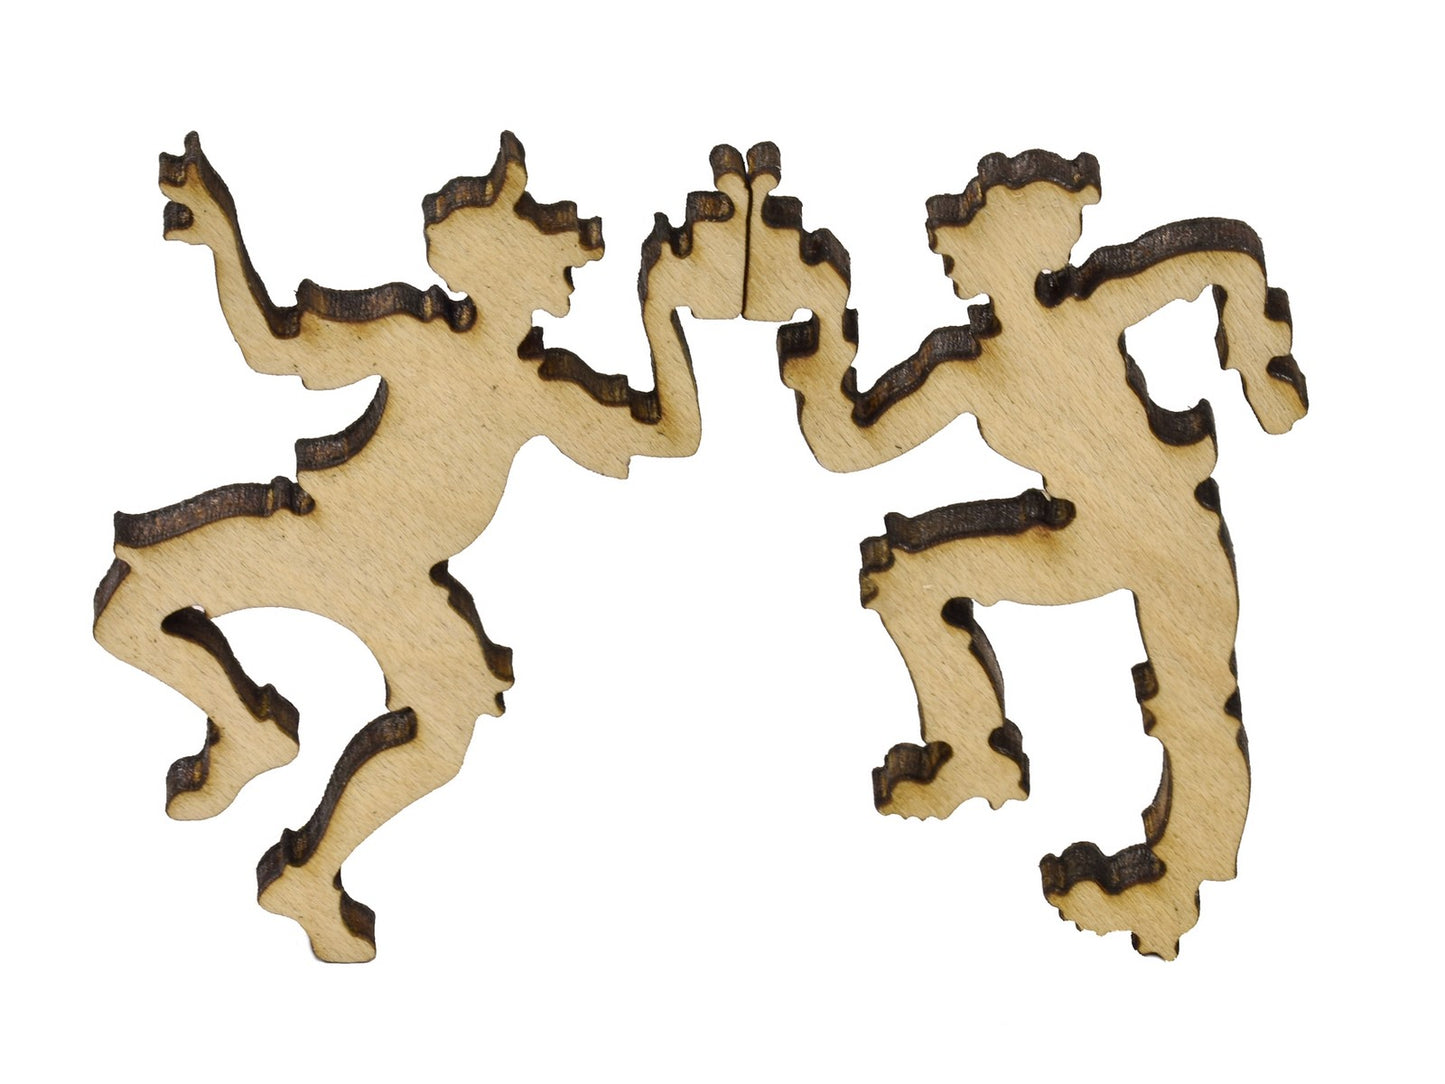 A closeup of pieces in the shape of two people clinking their glasses together.